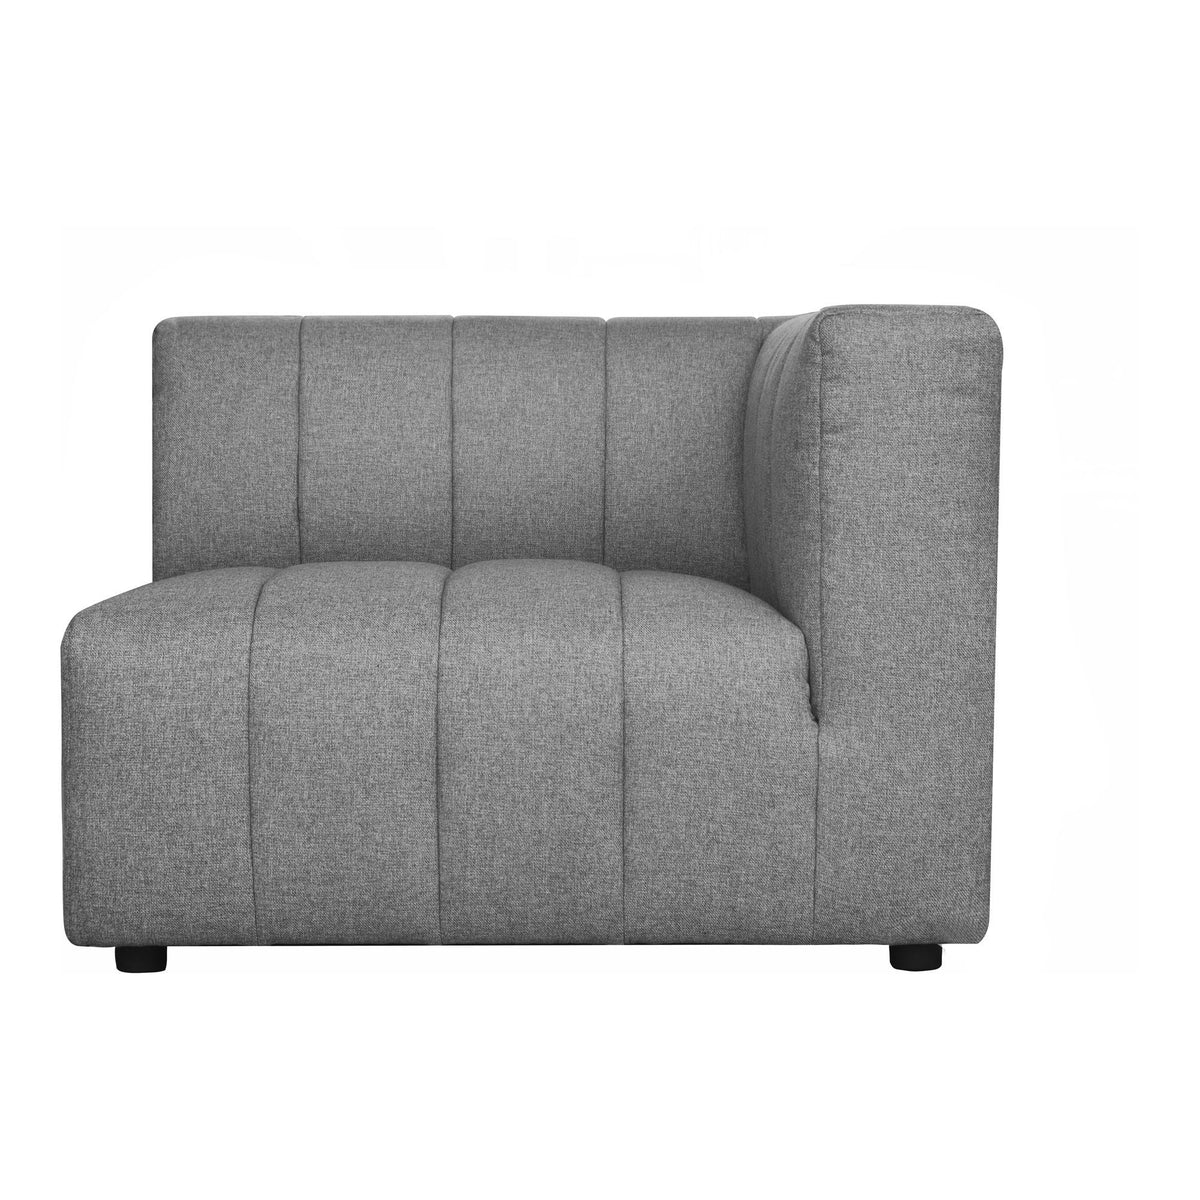 Moe's Home Collection Lyric Arm Chair Right Grey - MT-1023-15